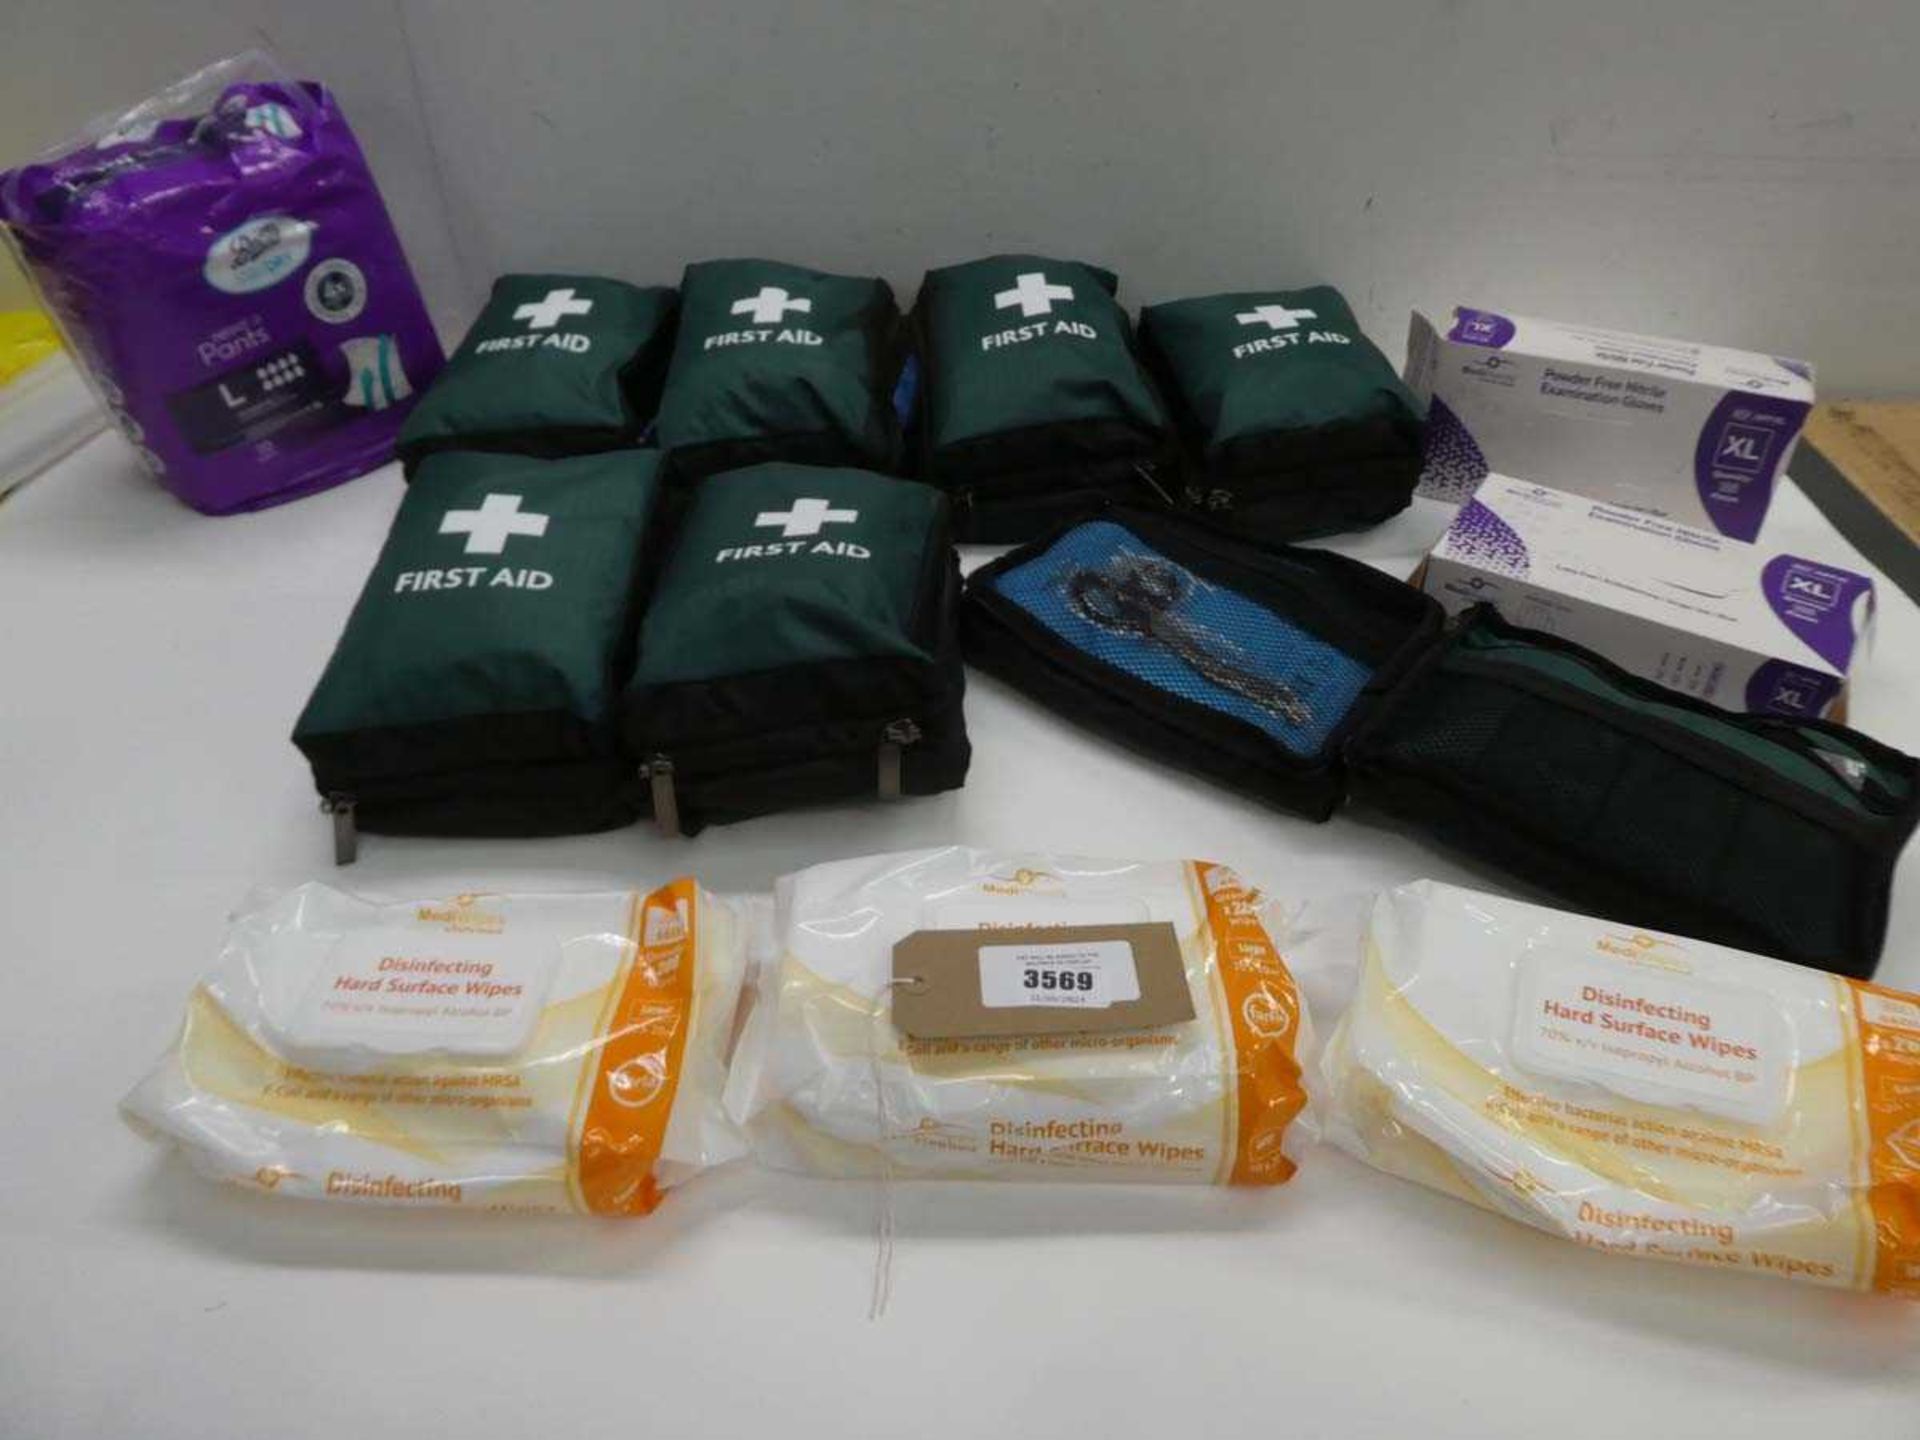 +VAT 7 x First Aid kits, Boots Stay Dry Night Pants Size L, Examination gloves and Disinfecting